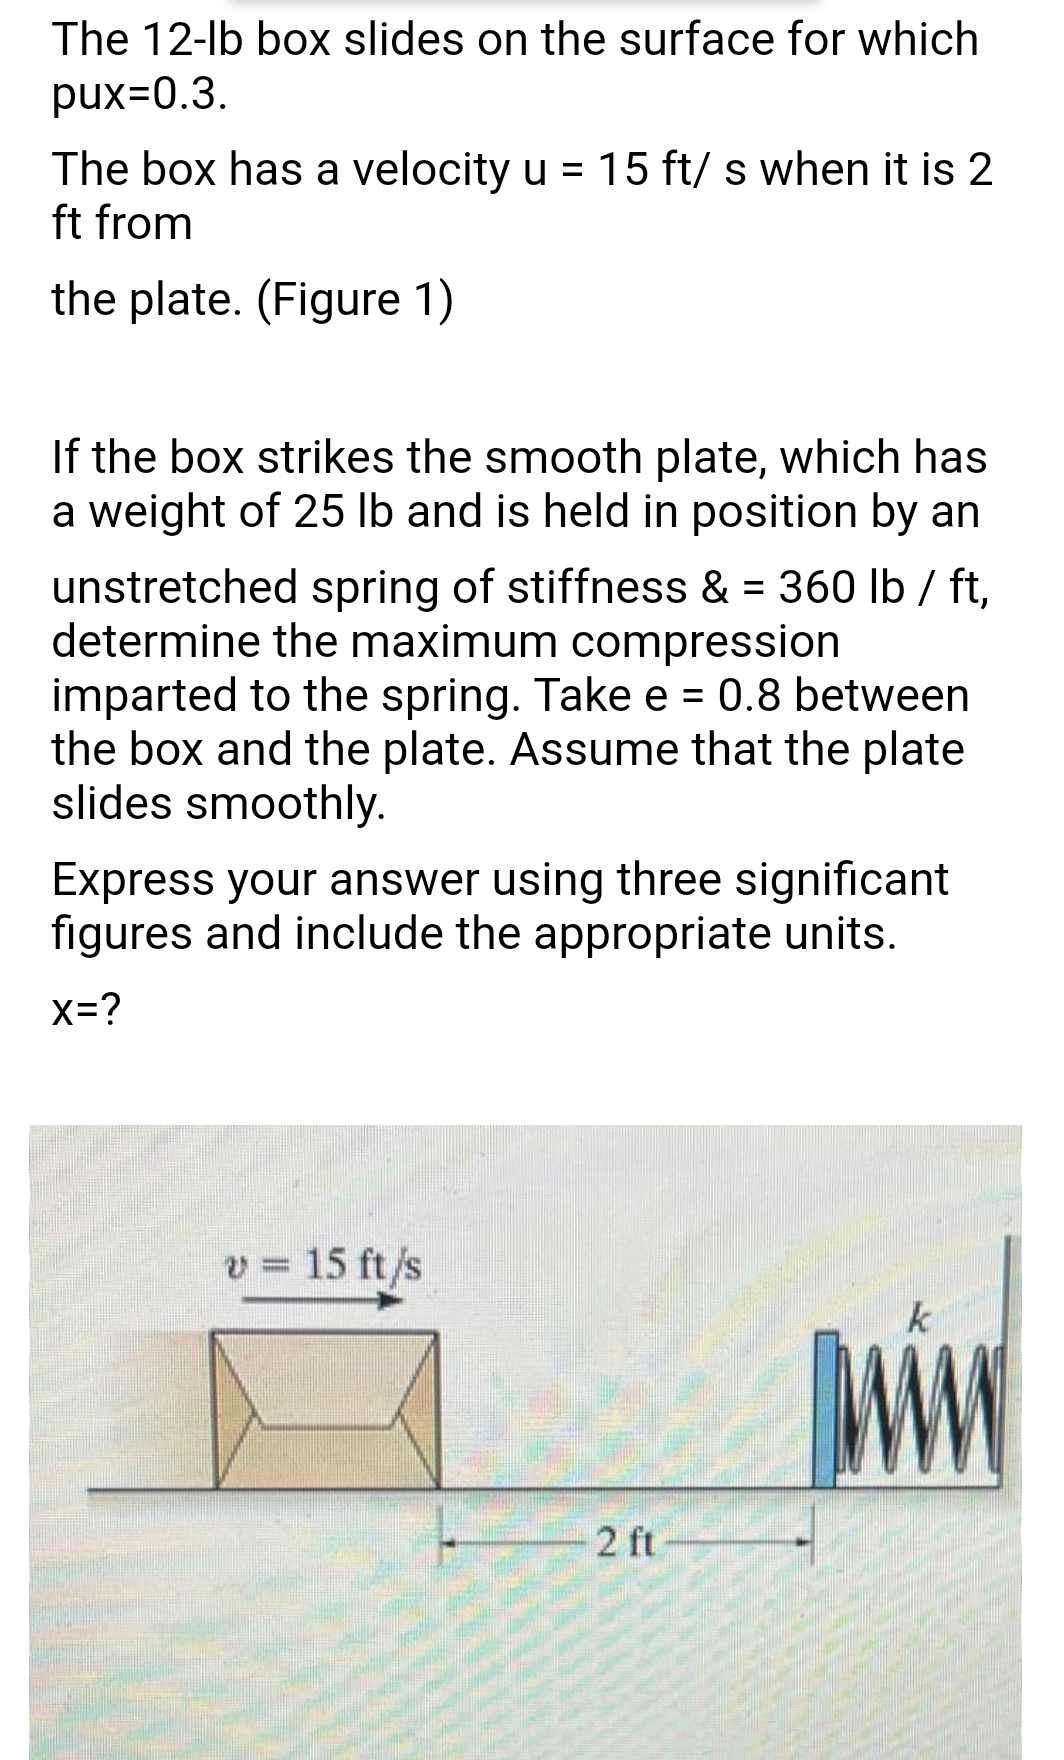 The 12-lb box slides on the surface for which
pux=0.3.
The box has a velocity u = 15 ft/ s when it is 2
ft from
the plate. (Figure 1)
If the box strikes the smooth plate, which has
a weight of 25 lb and is held in position by an
unstretched spring of stiffness & = 360 lb / ft,
determine the maximum compression
imparted to the spring. Take e = 0.8 between
the box and the plate. Assume that the plate
slides smoothly.
Express your answer using three significant
figures and include the appropriate units.
x=?
v = 15 ft /s
k
2 ft
